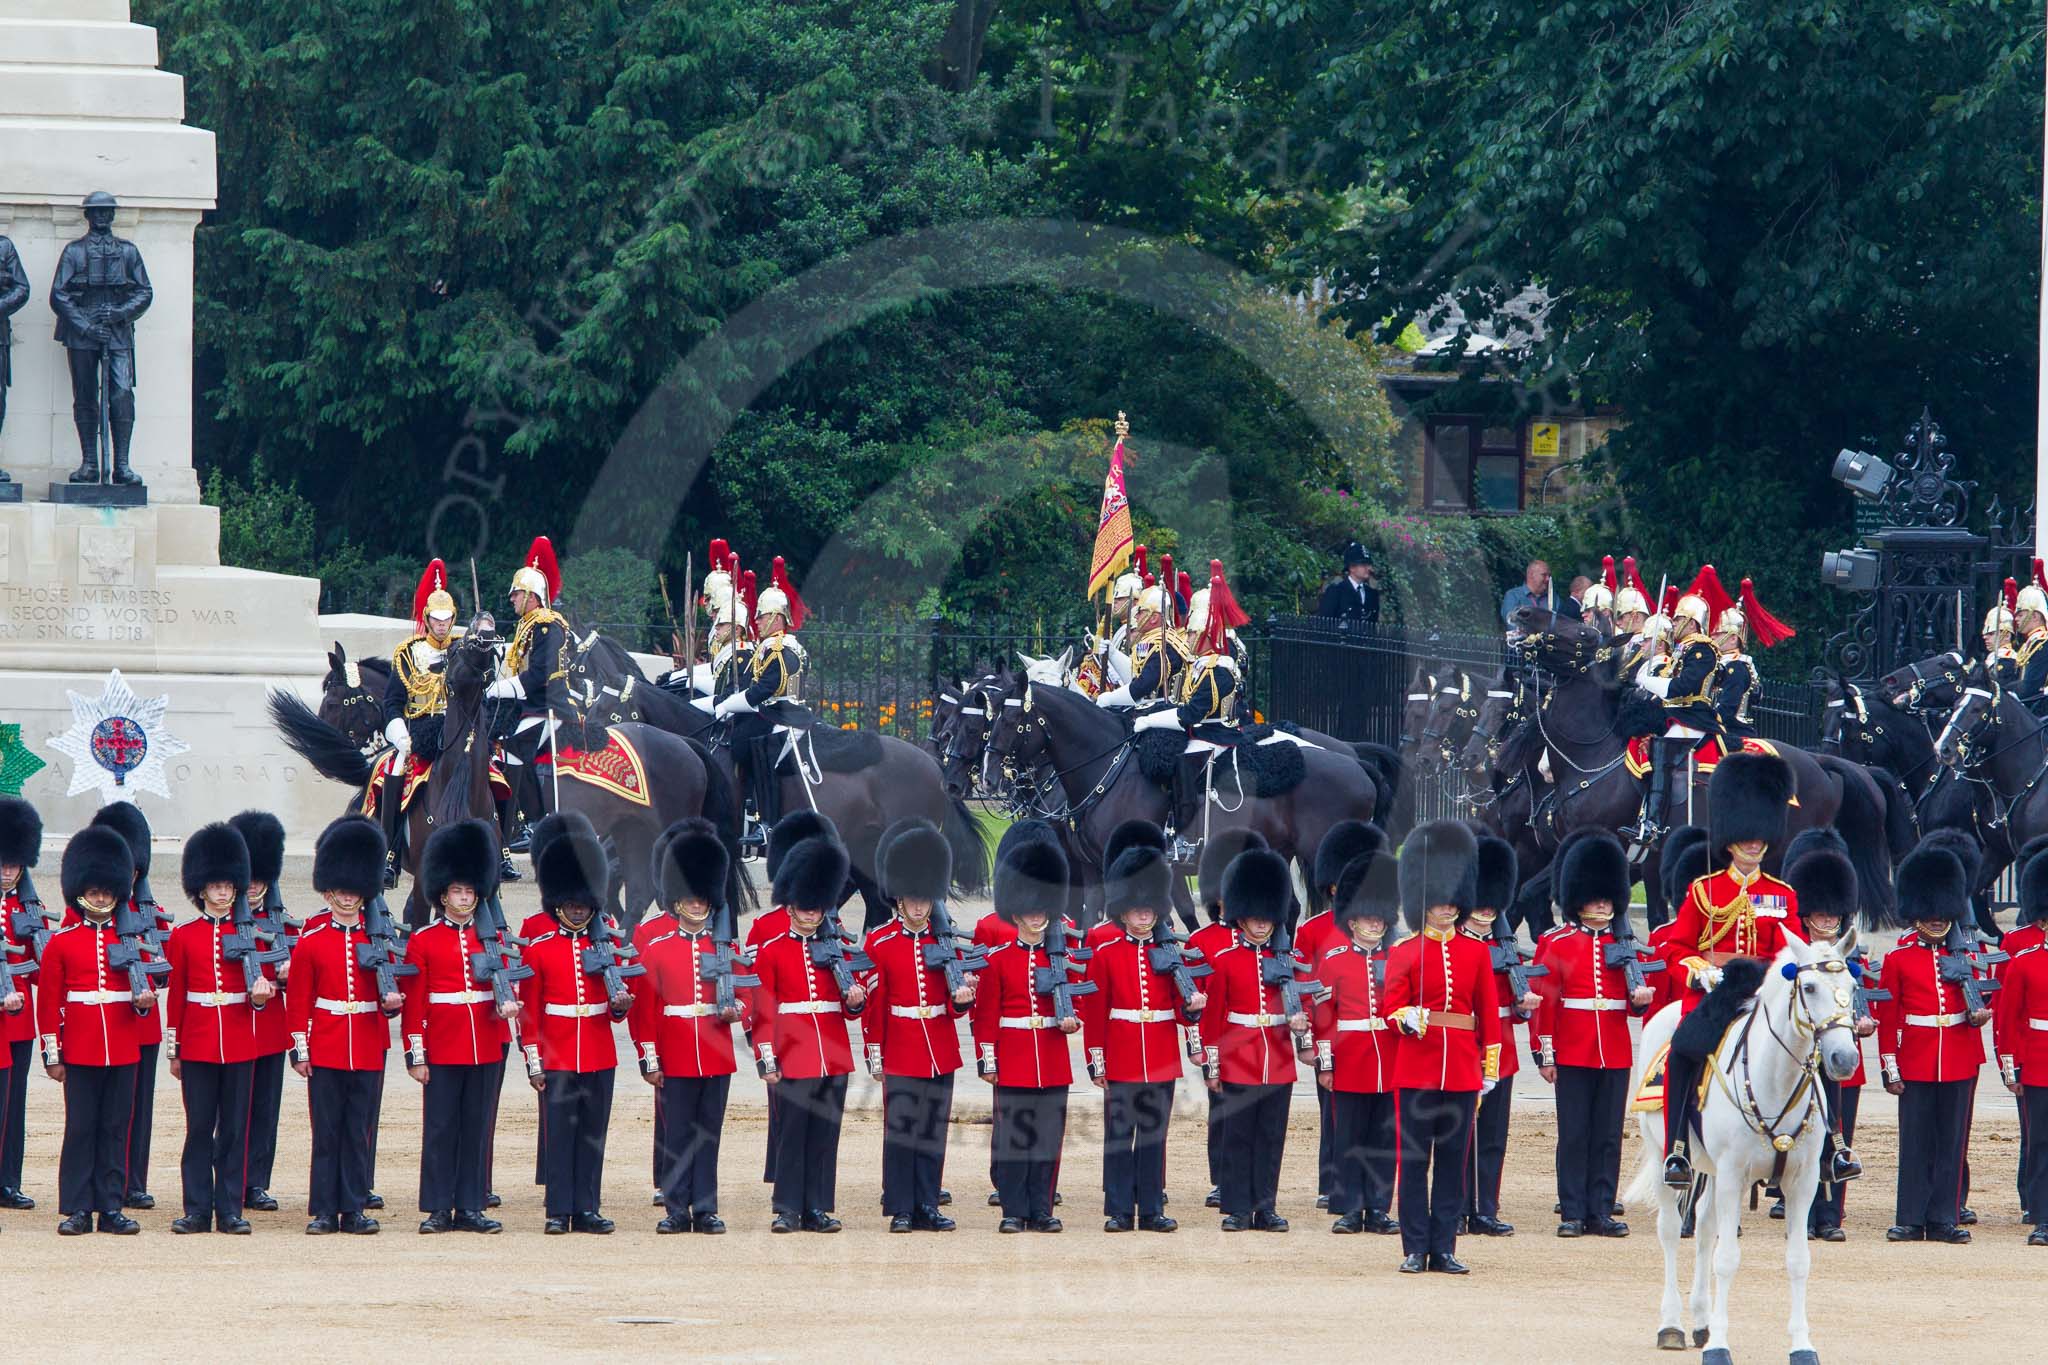 Trooping the Colour 2014.
Horse Guards Parade, Westminster,
London SW1A,

United Kingdom,
on 14 June 2014 at 12:03, image #850